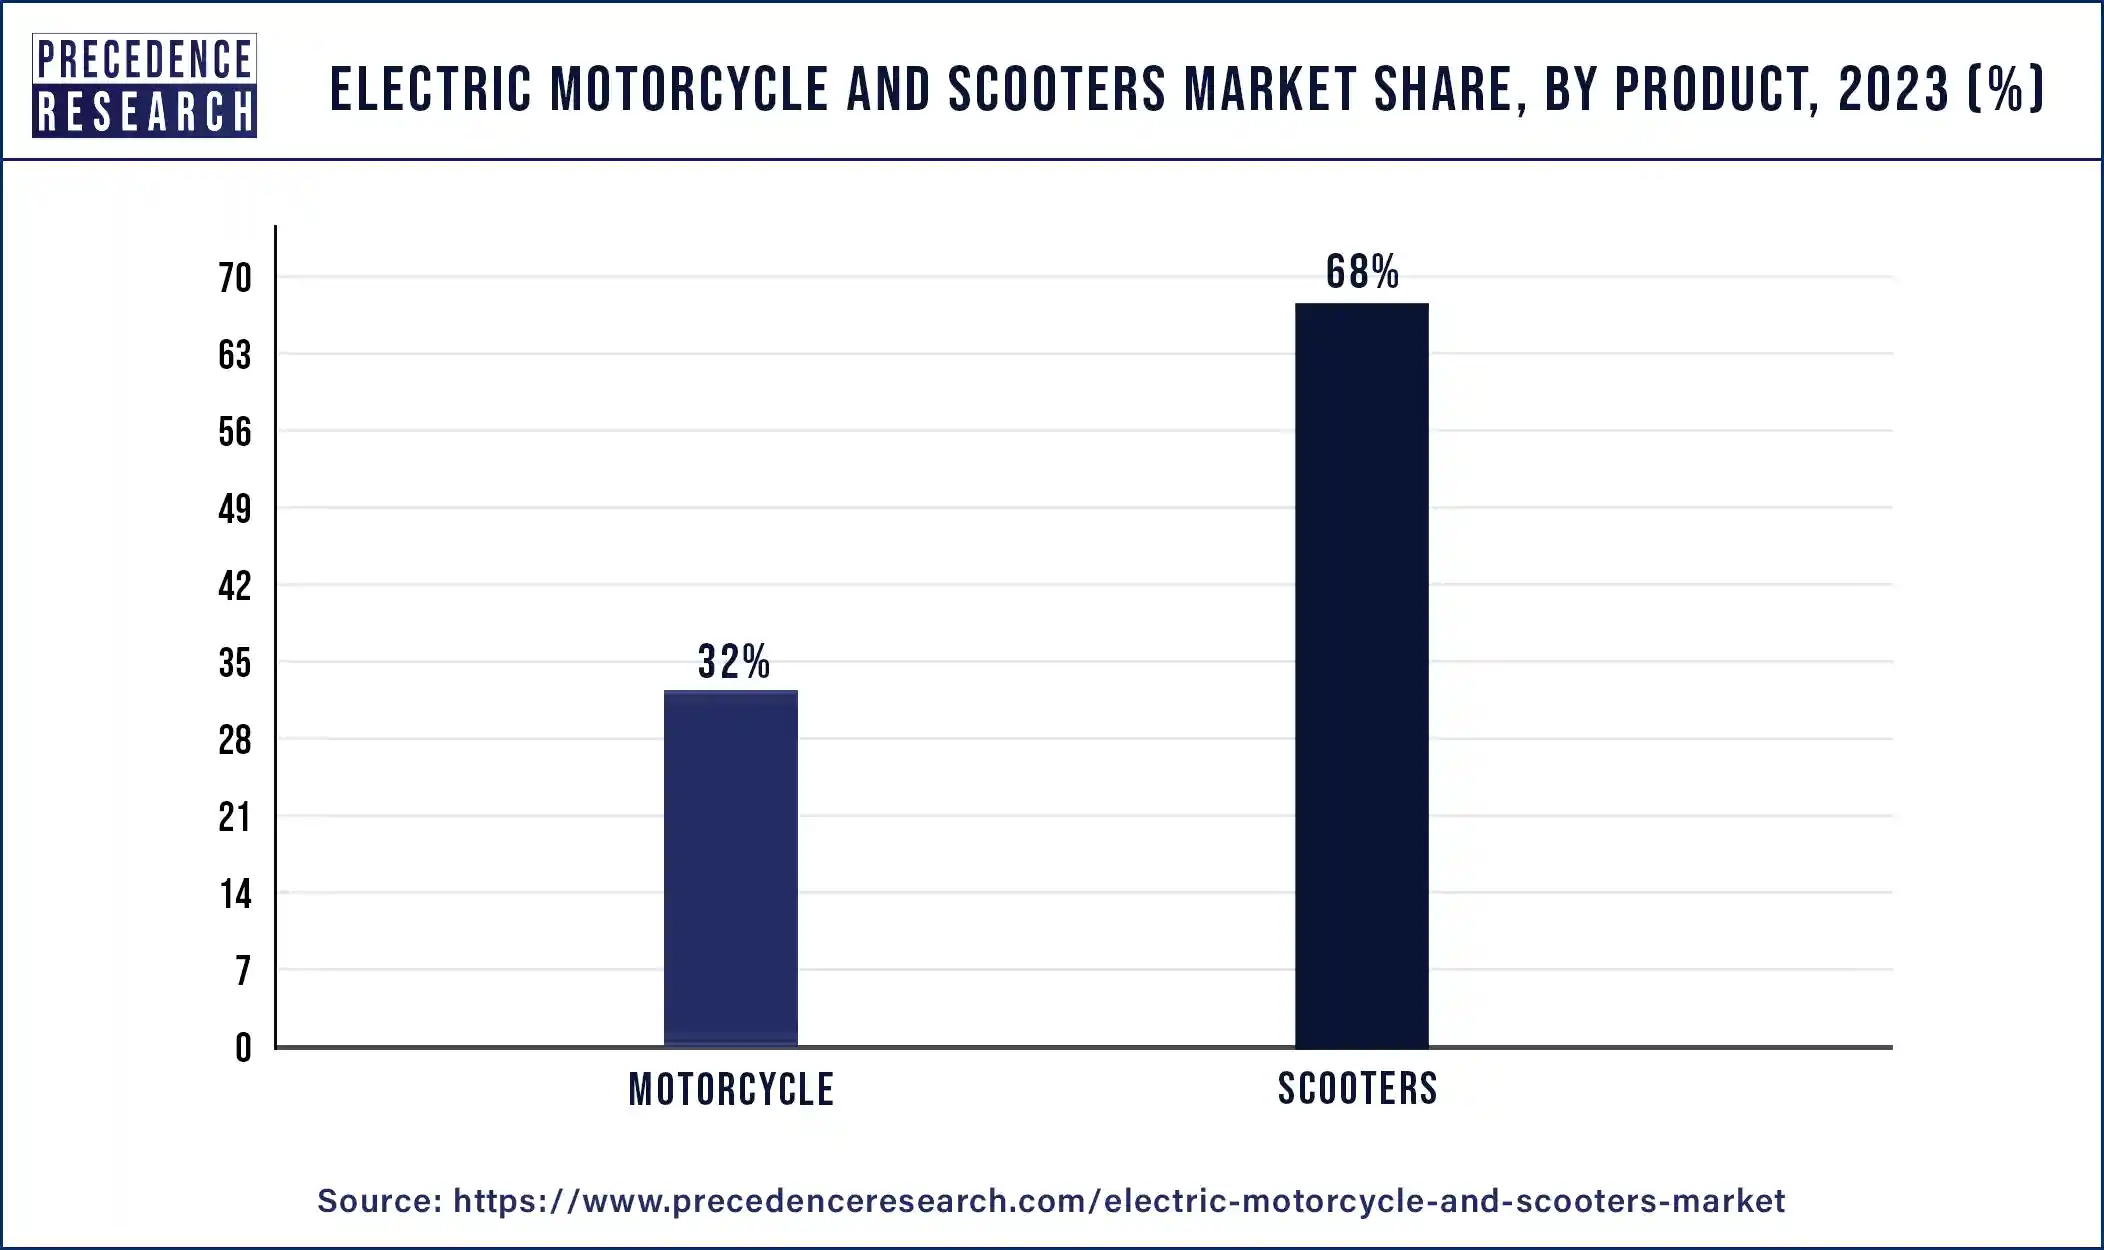 Electric Motorcycle and Scooters Market Share, By Product, 2023 (%)